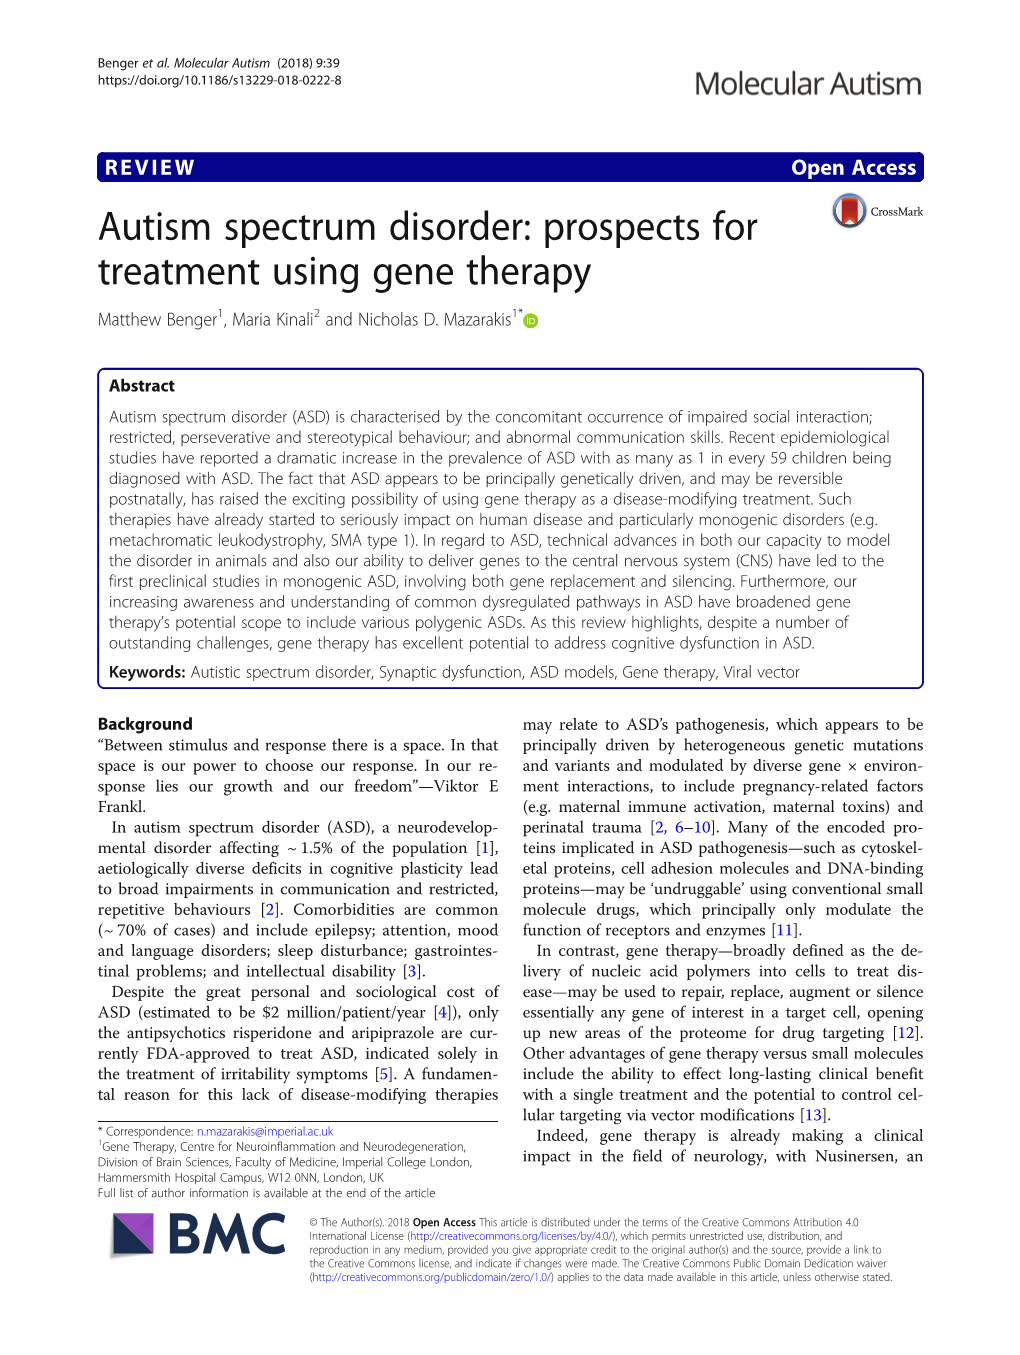 Autism Spectrum Disorder: Prospects for Treatment Using Gene Therapy Matthew Benger1, Maria Kinali2 and Nicholas D